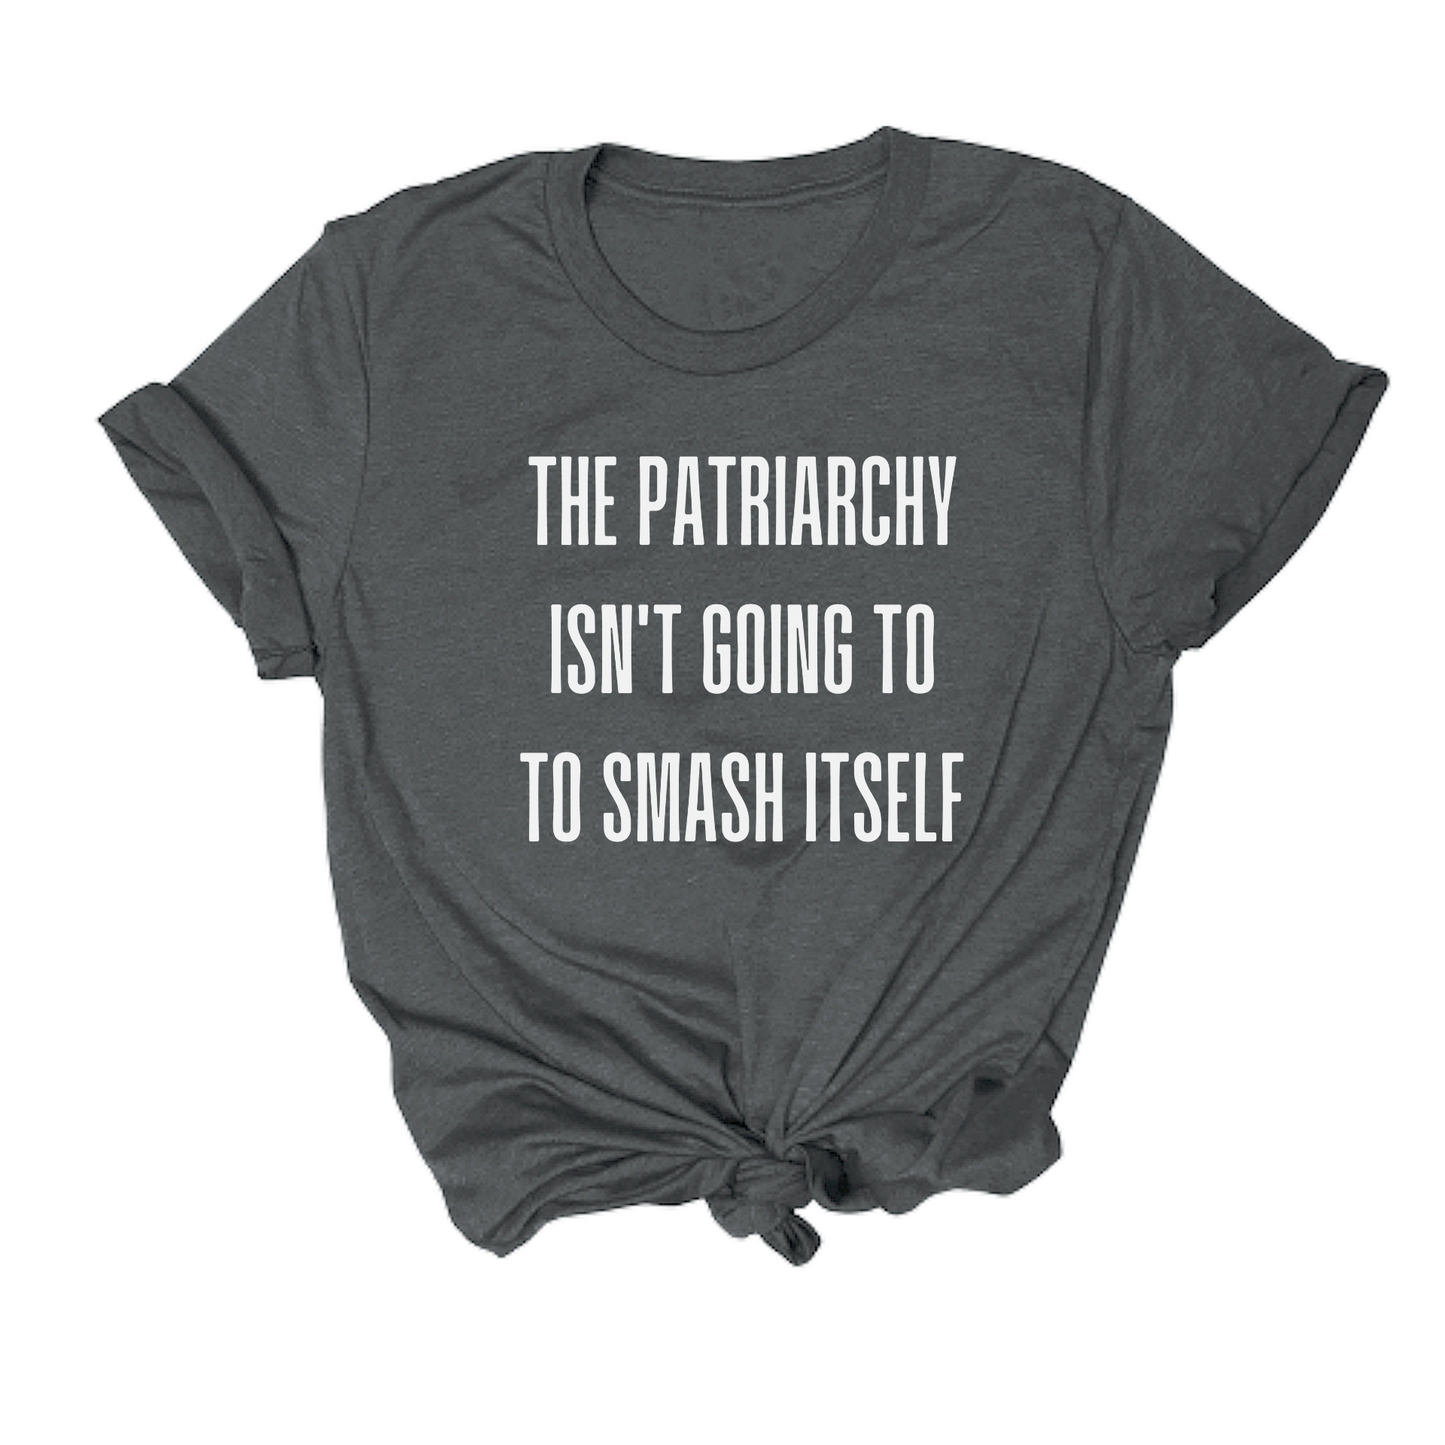 The Patriarchy Isn't Going To Smash Itself Tee